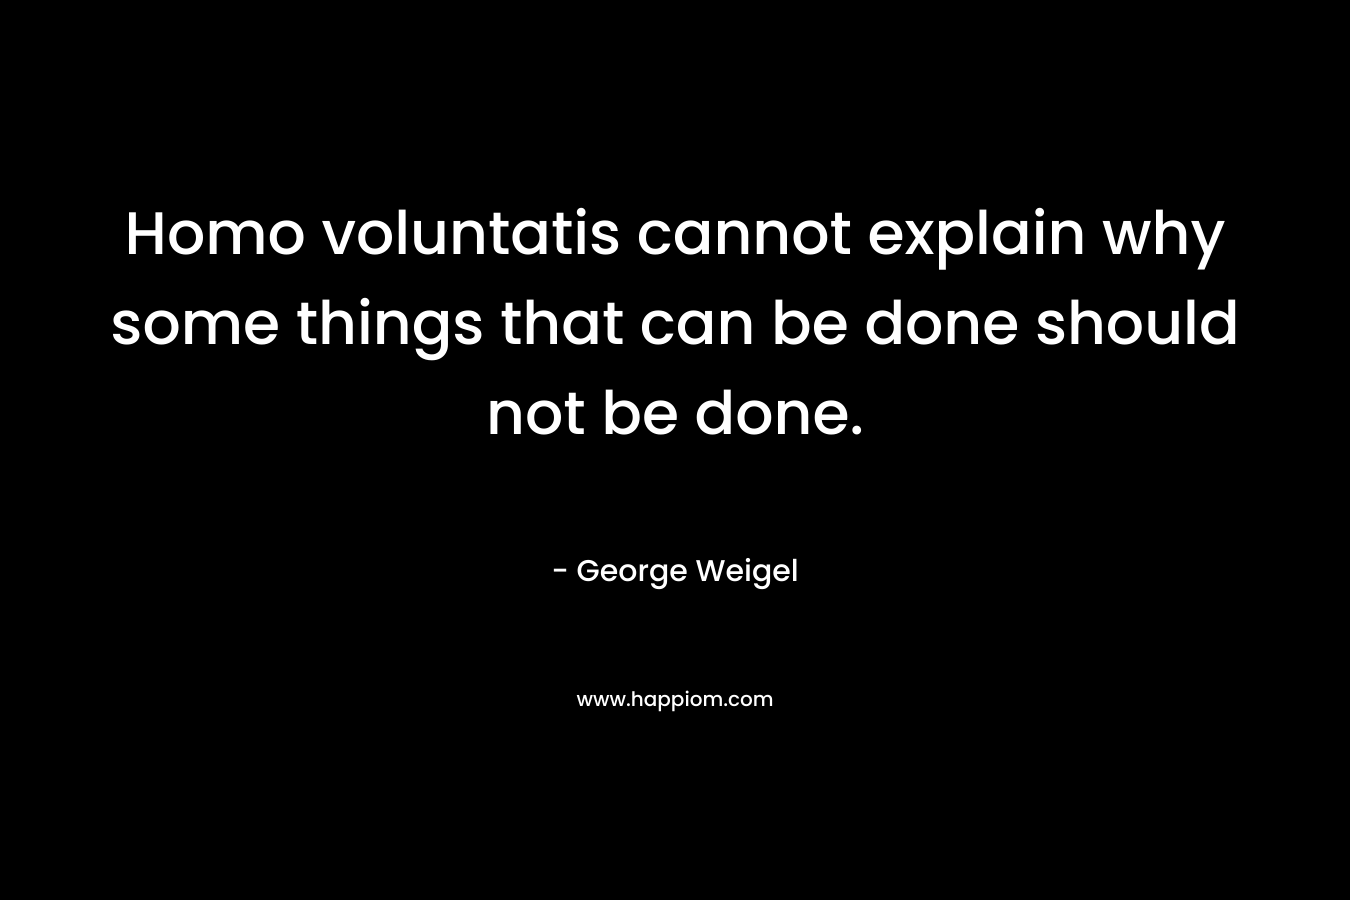 Homo voluntatis cannot explain why some things that can be done should not be done. – George Weigel